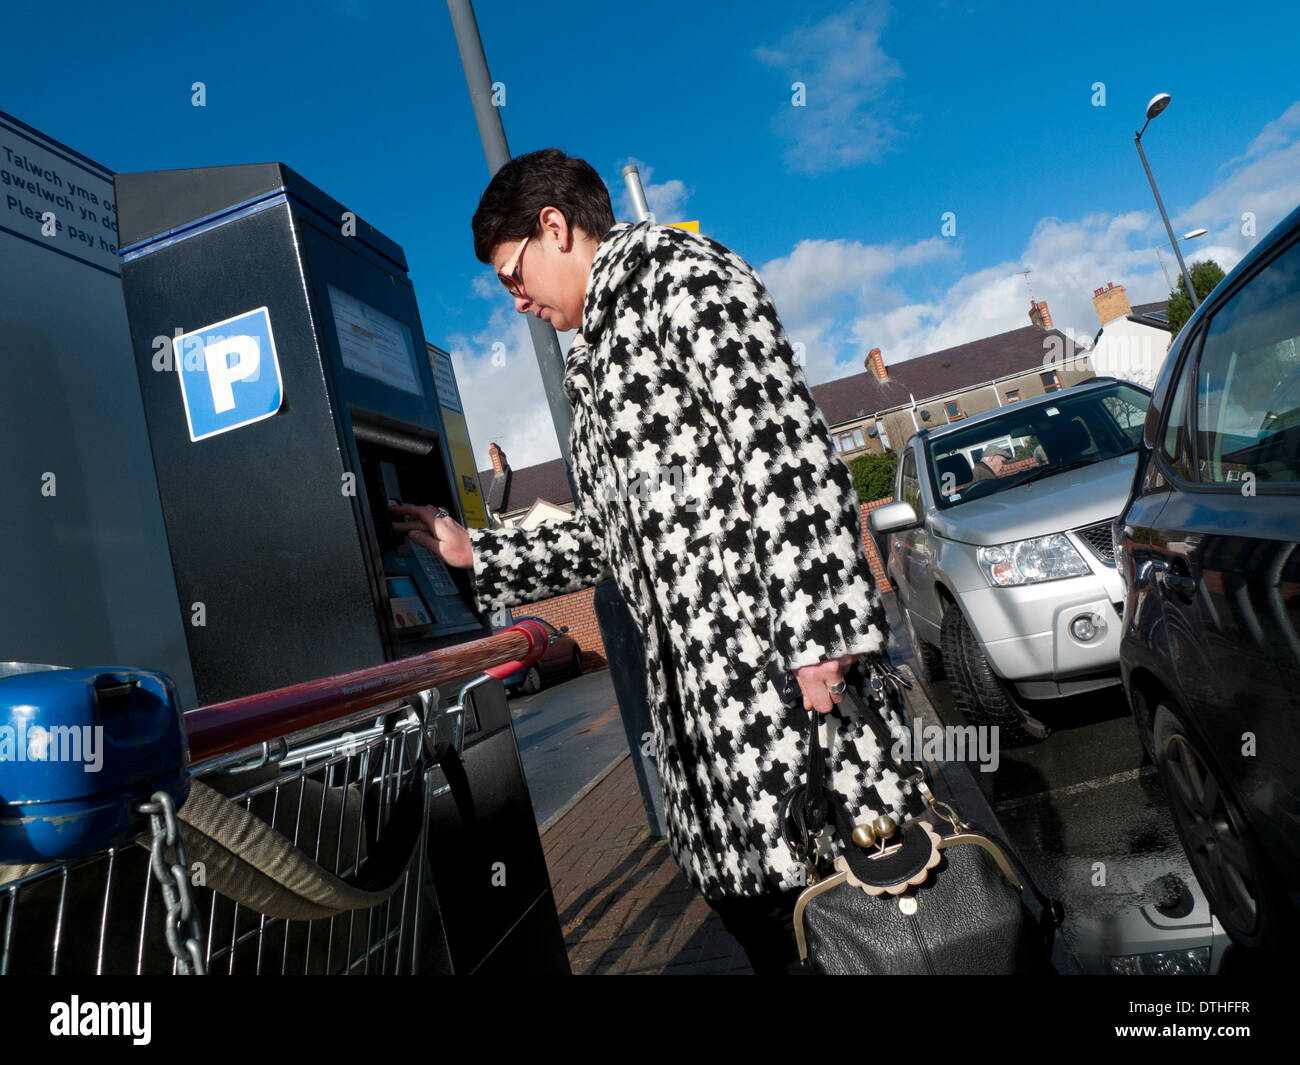 A woman in a houndstooth pattern fabric check coat putting money into a parking machine in a supermarket carpark UK KATHY DEWITT Stock Photo